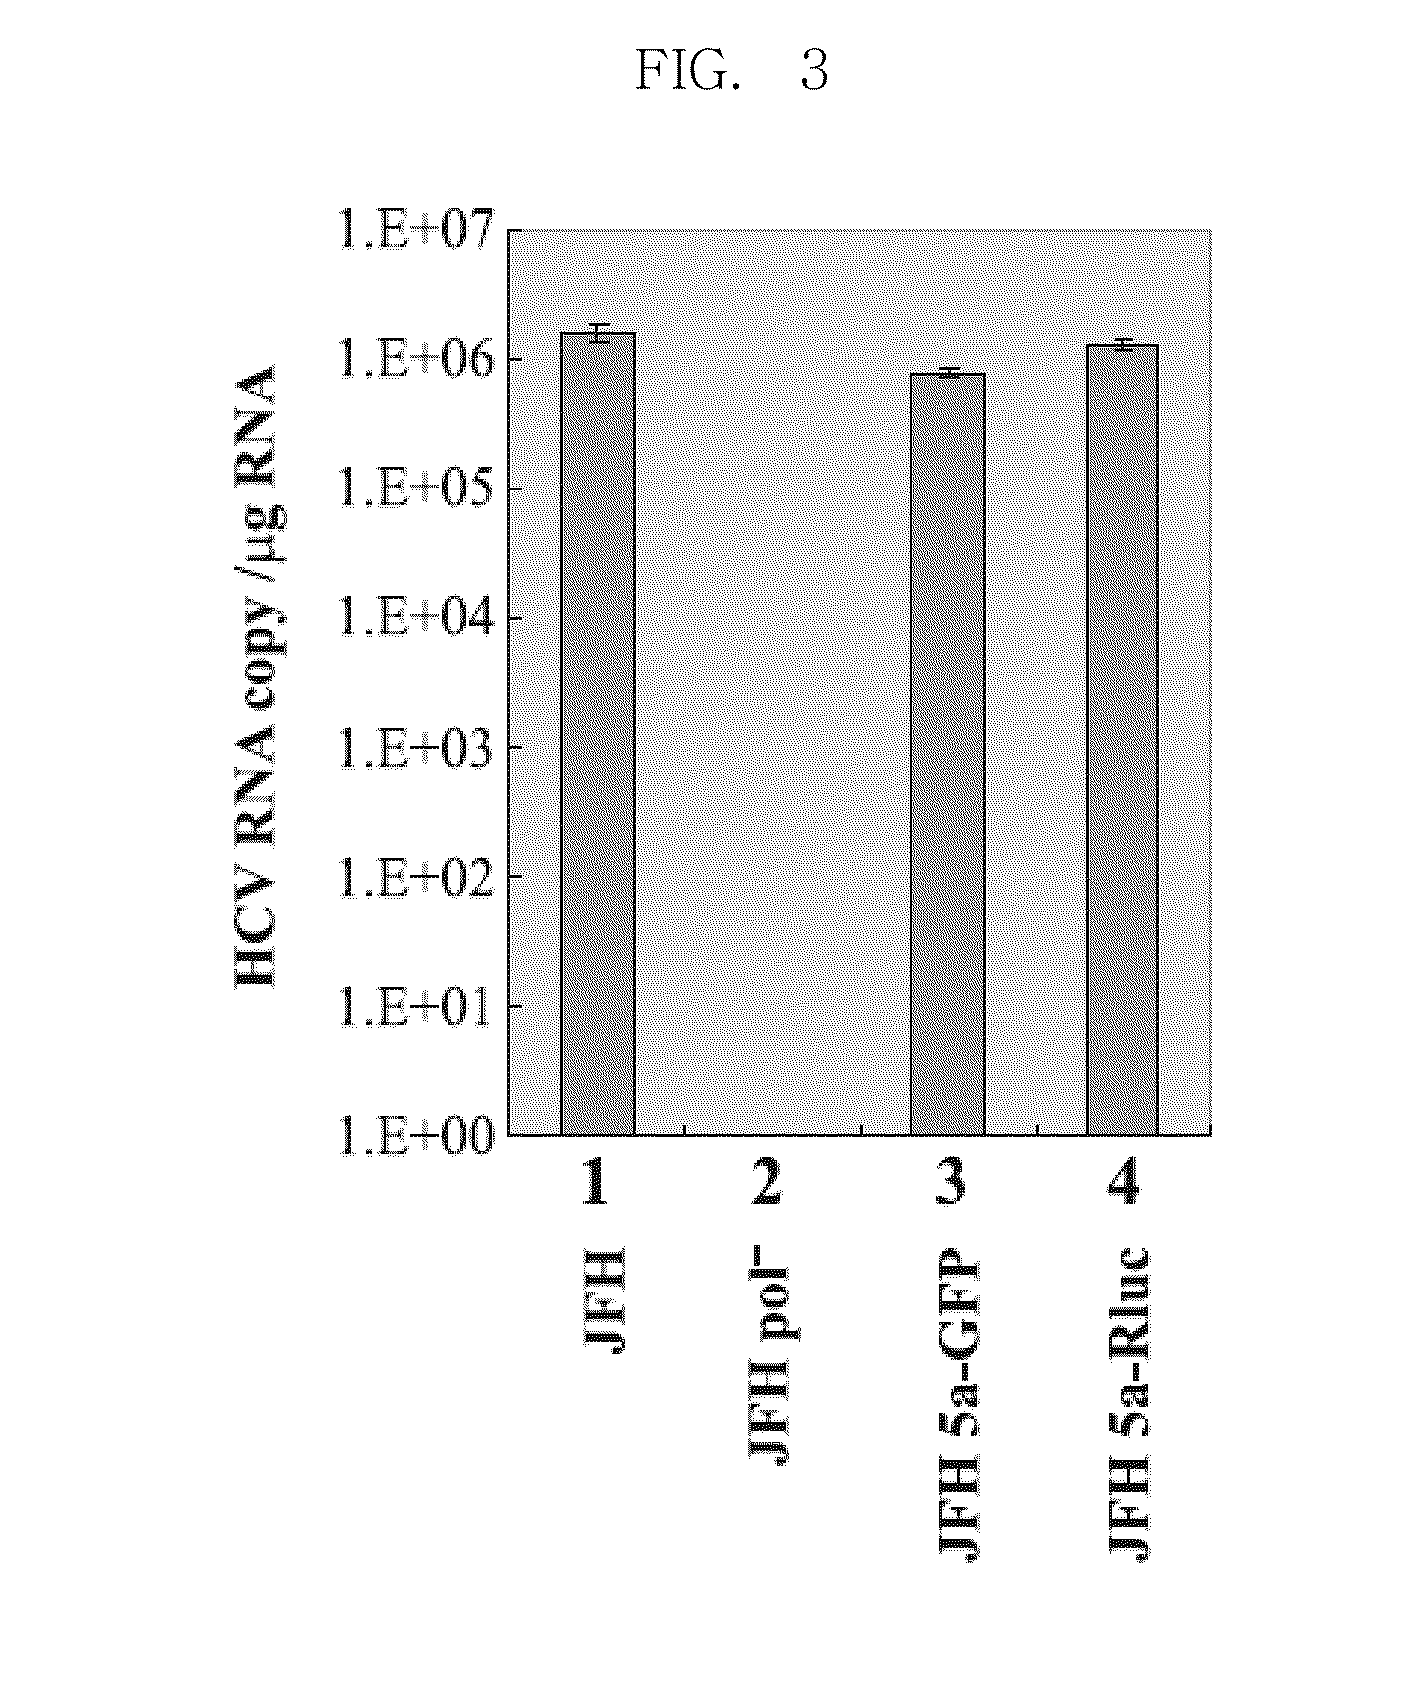 Efficiently replicable heptitis c virus mutant, a heptitis c virus mutant comprising reporter gene, a method of preparing of hcv vaccine using the same and a method of screening anti hcv composition using the same